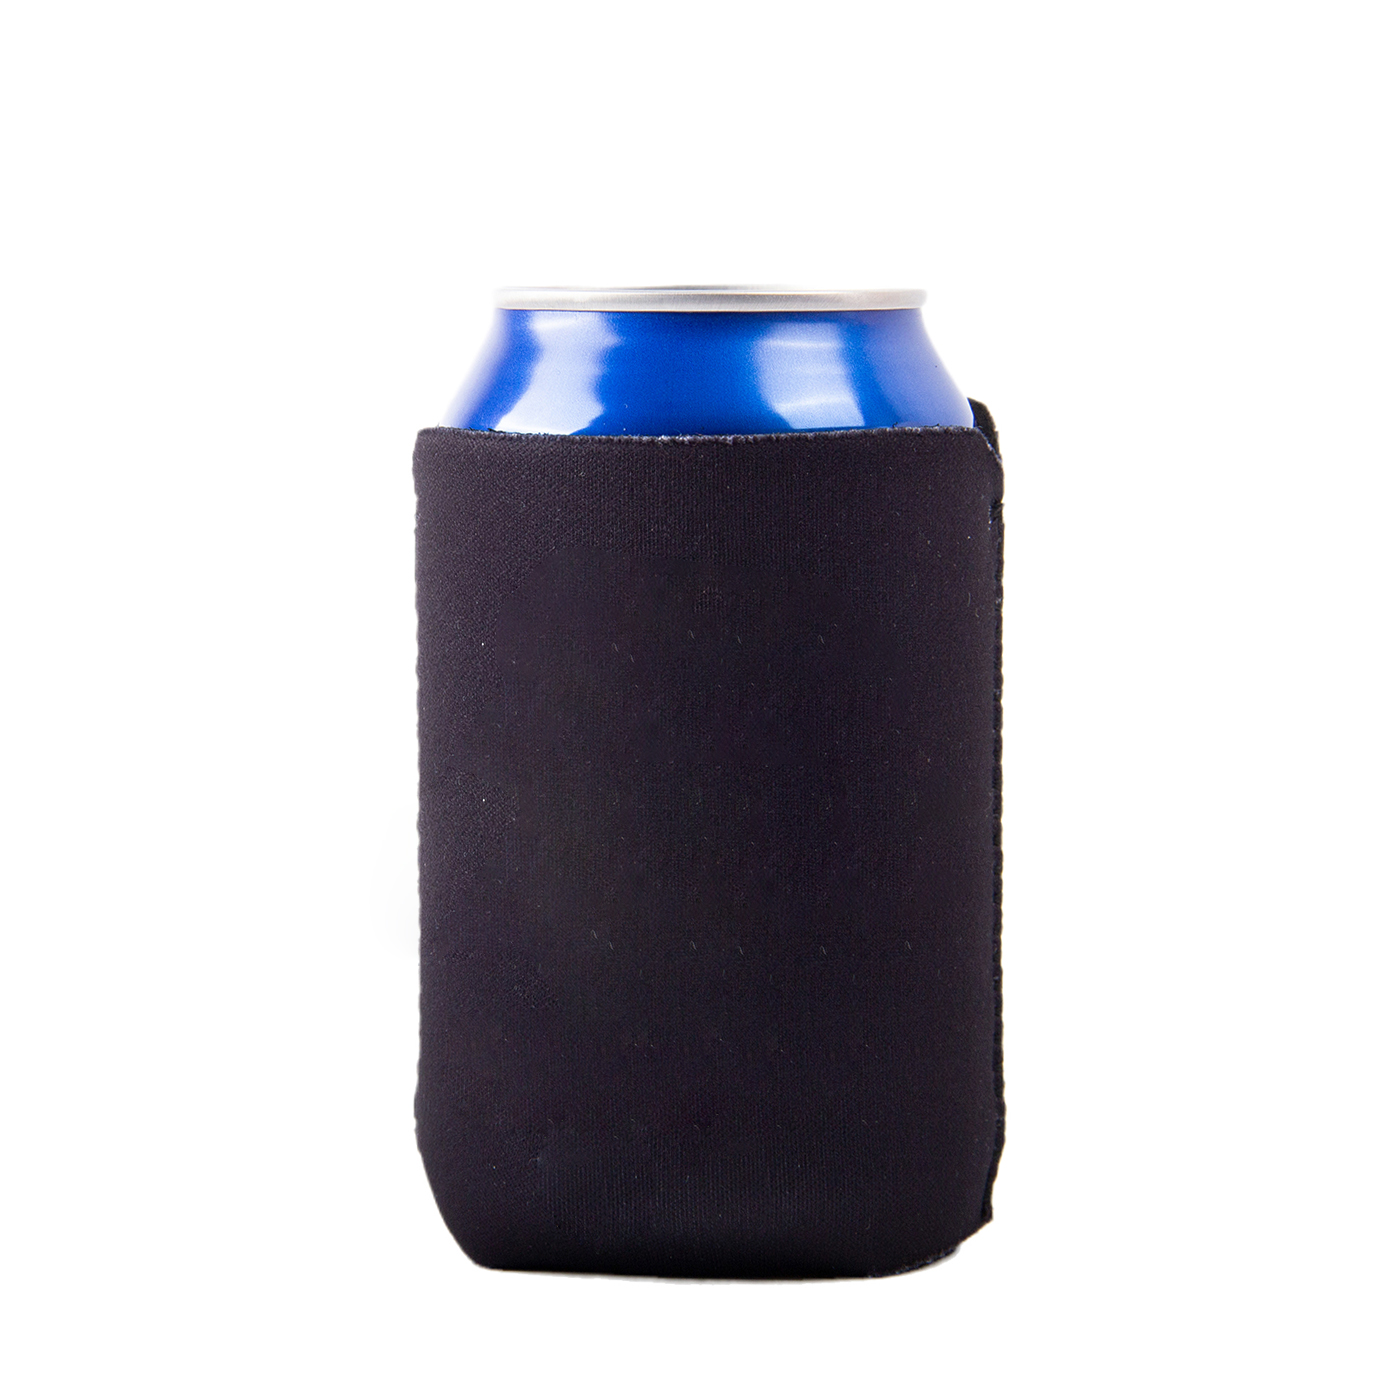 11 oz. Personalized Neoprene Can Cooler2